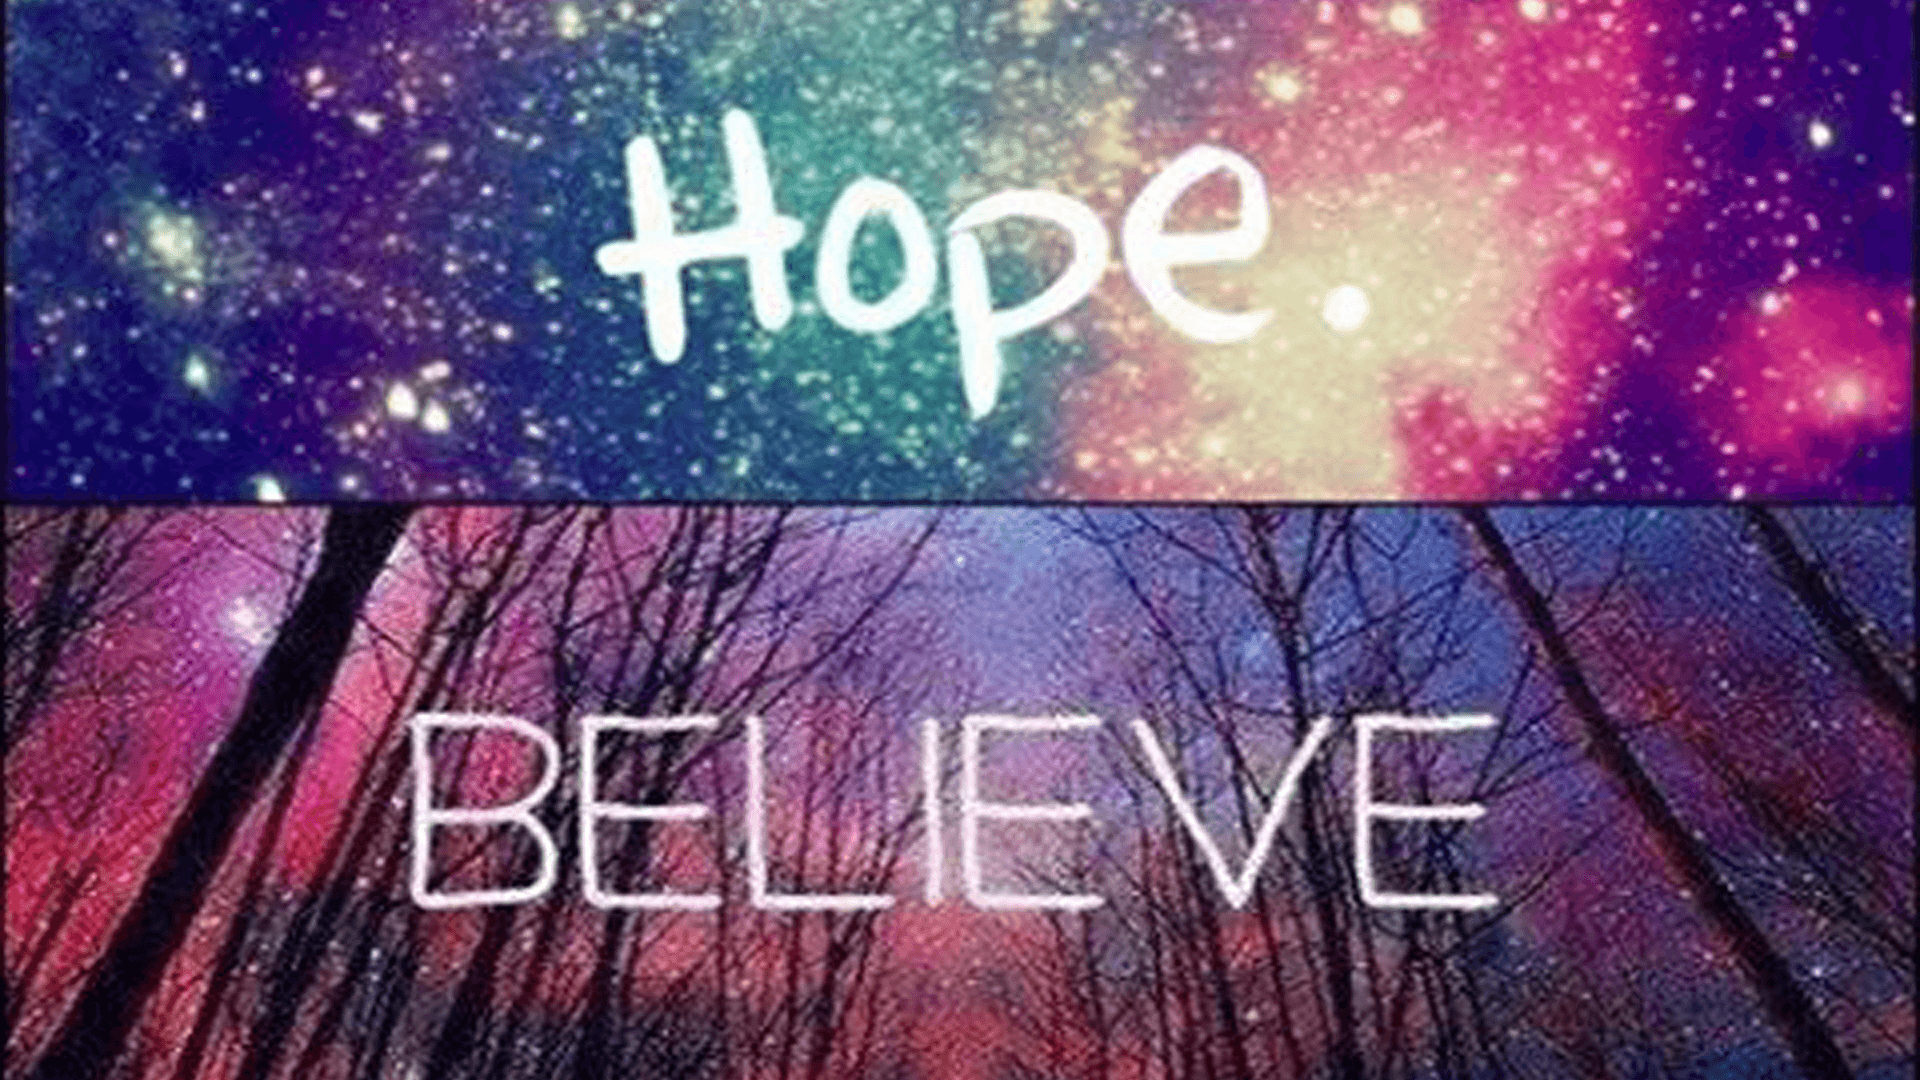 Believe Background Images HD Pictures and Wallpaper For Free Download   Pngtree